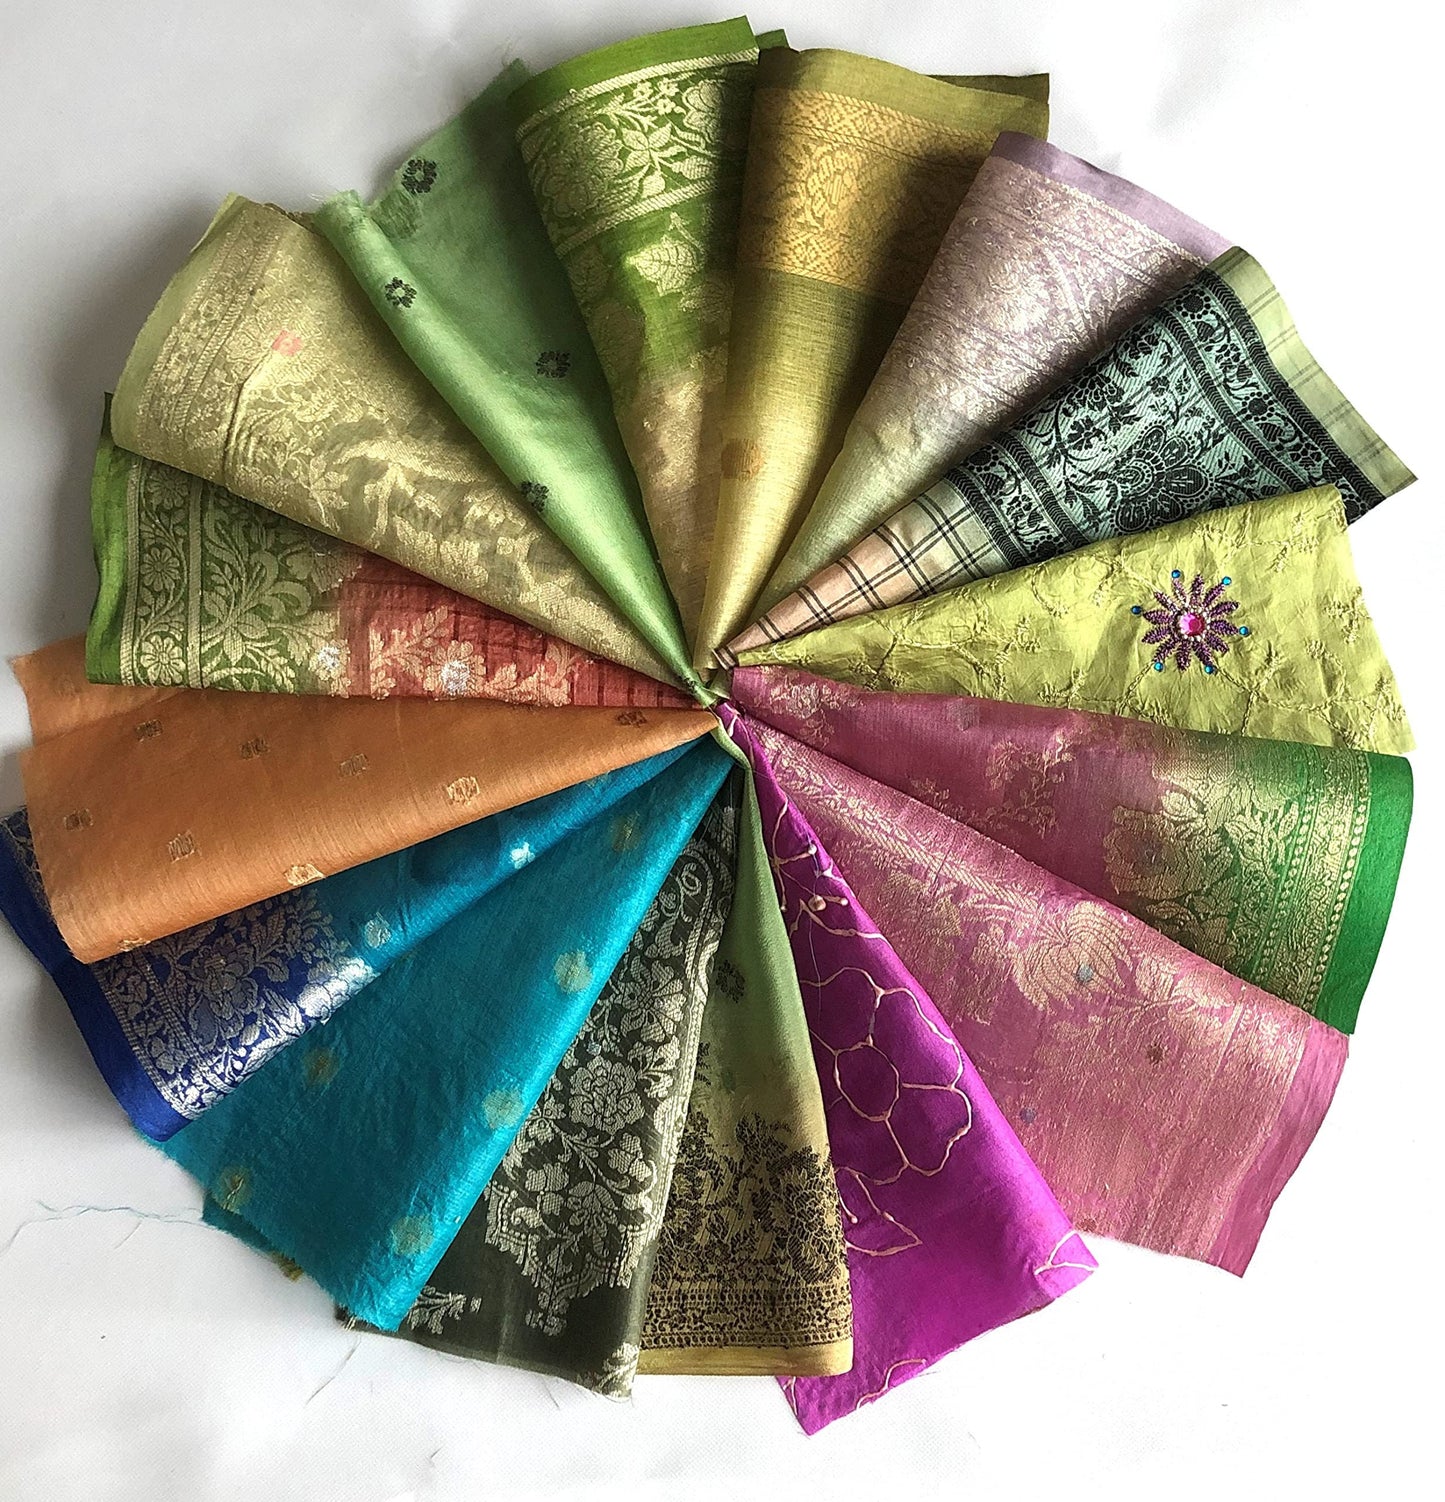 5 Inch x 16 Pieces Mixed Colour Recycled Vintage Sari Scraps Craft Fabric Card Making Collage Mixed Media Textile Art Sewing Junk Journals